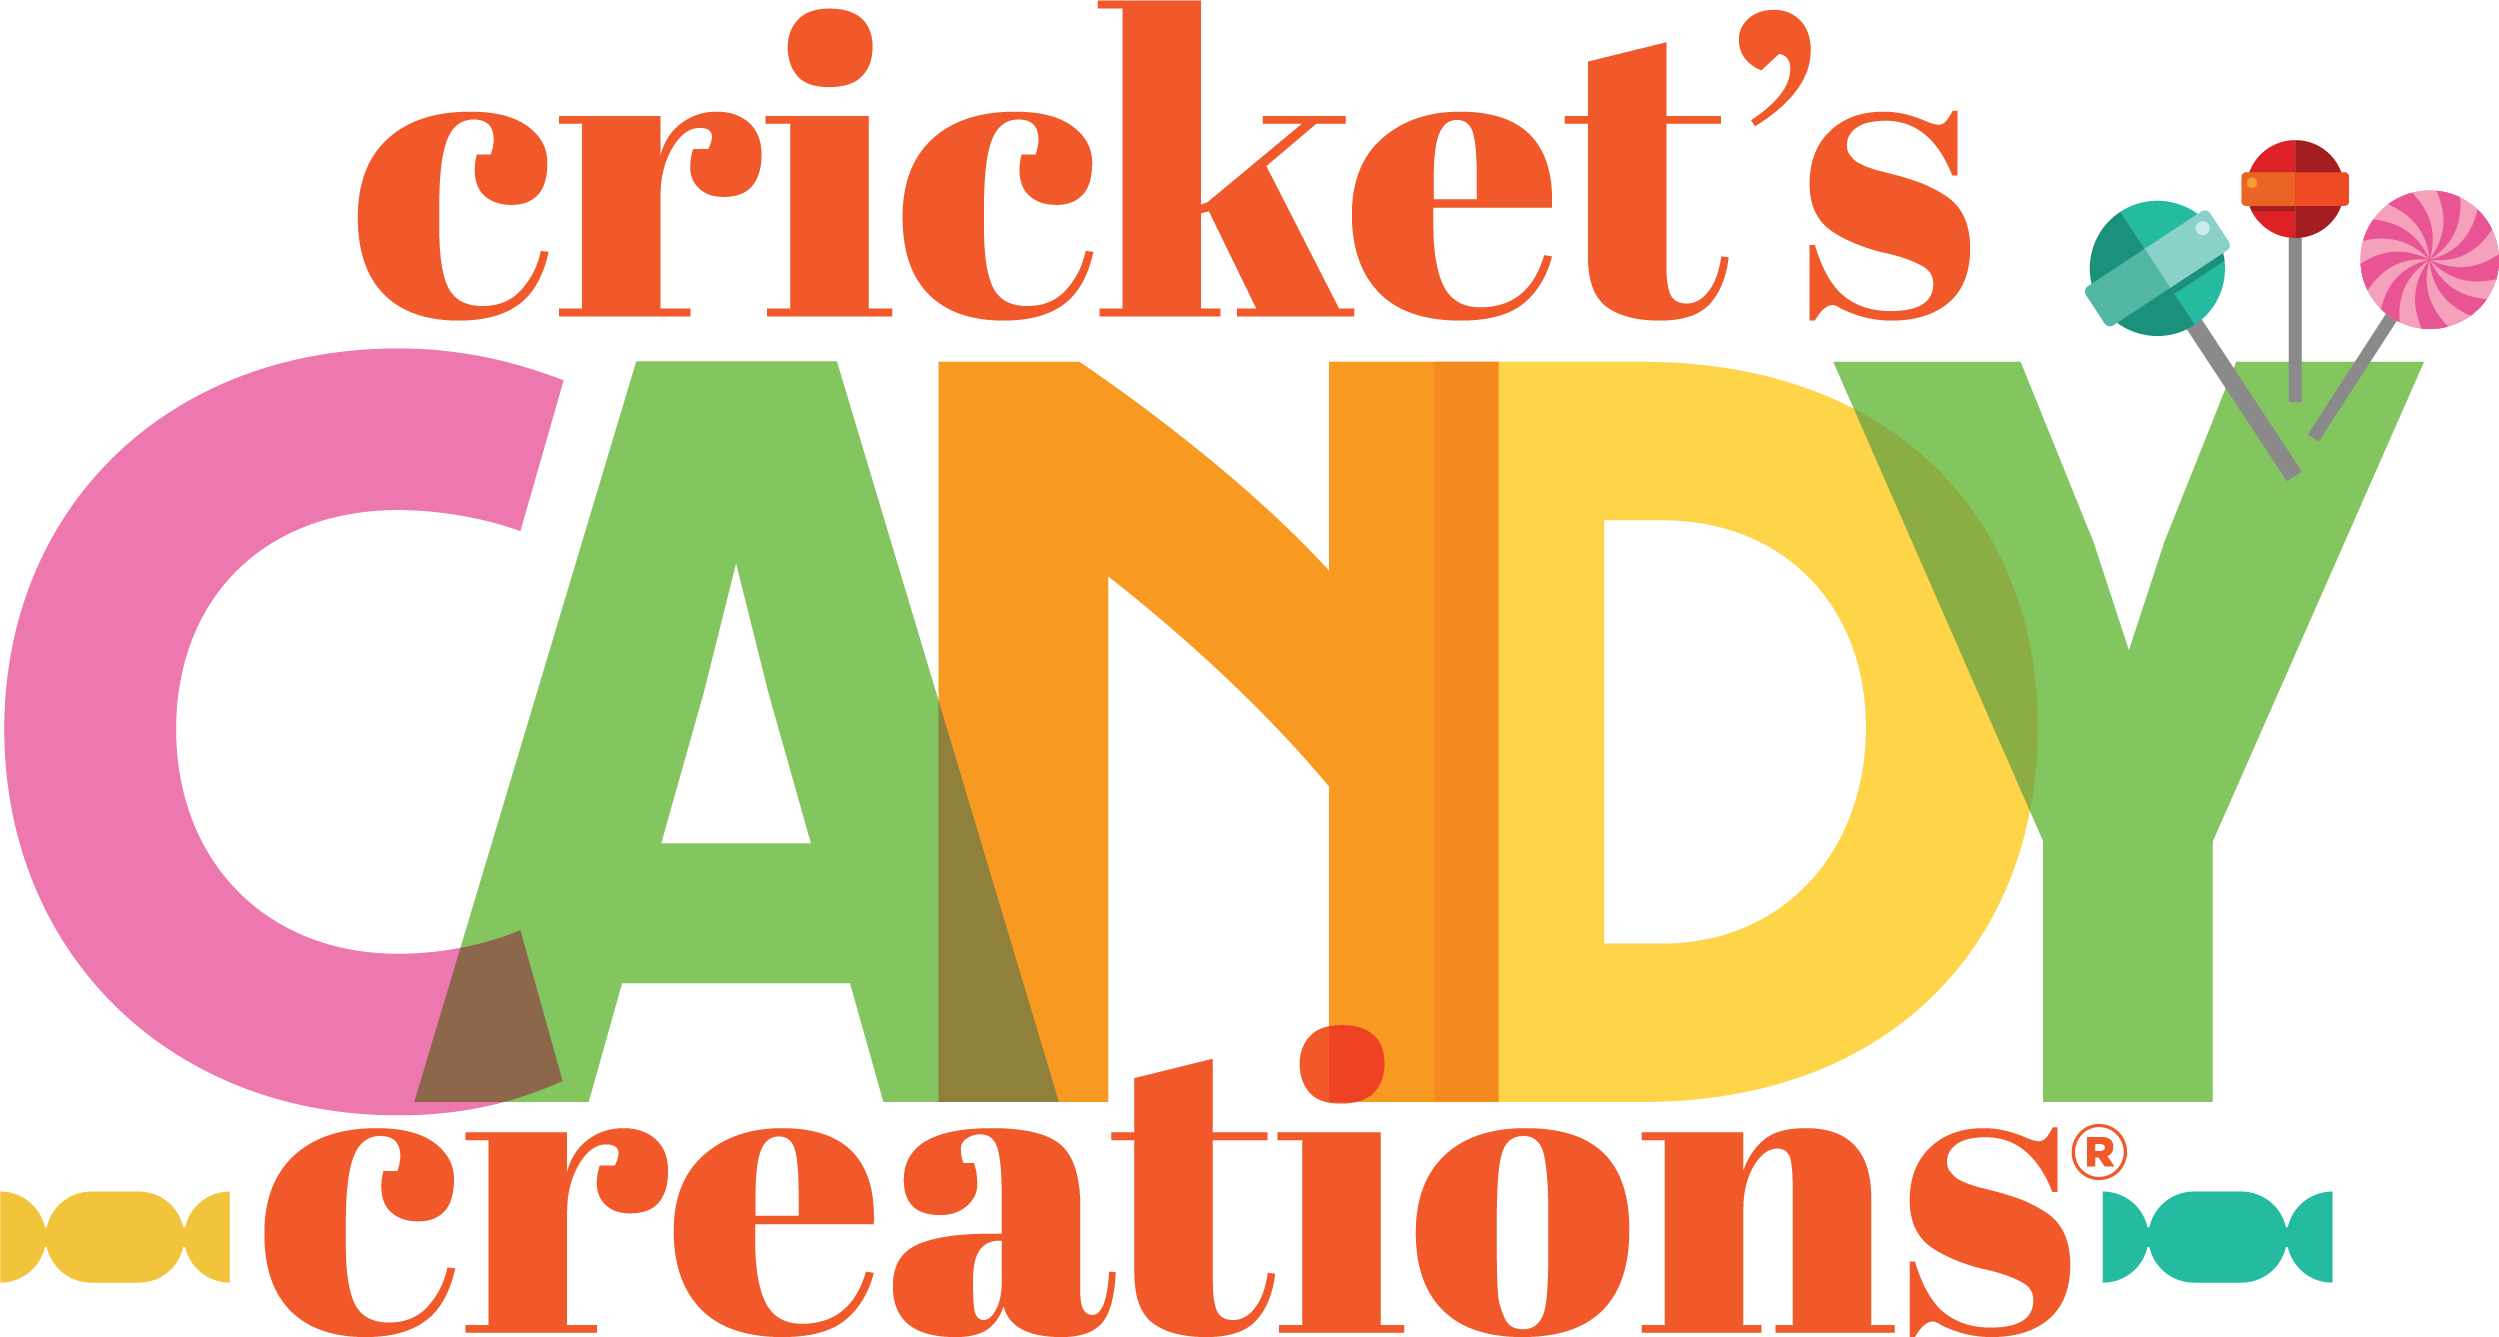 Cricket's Candy Creations